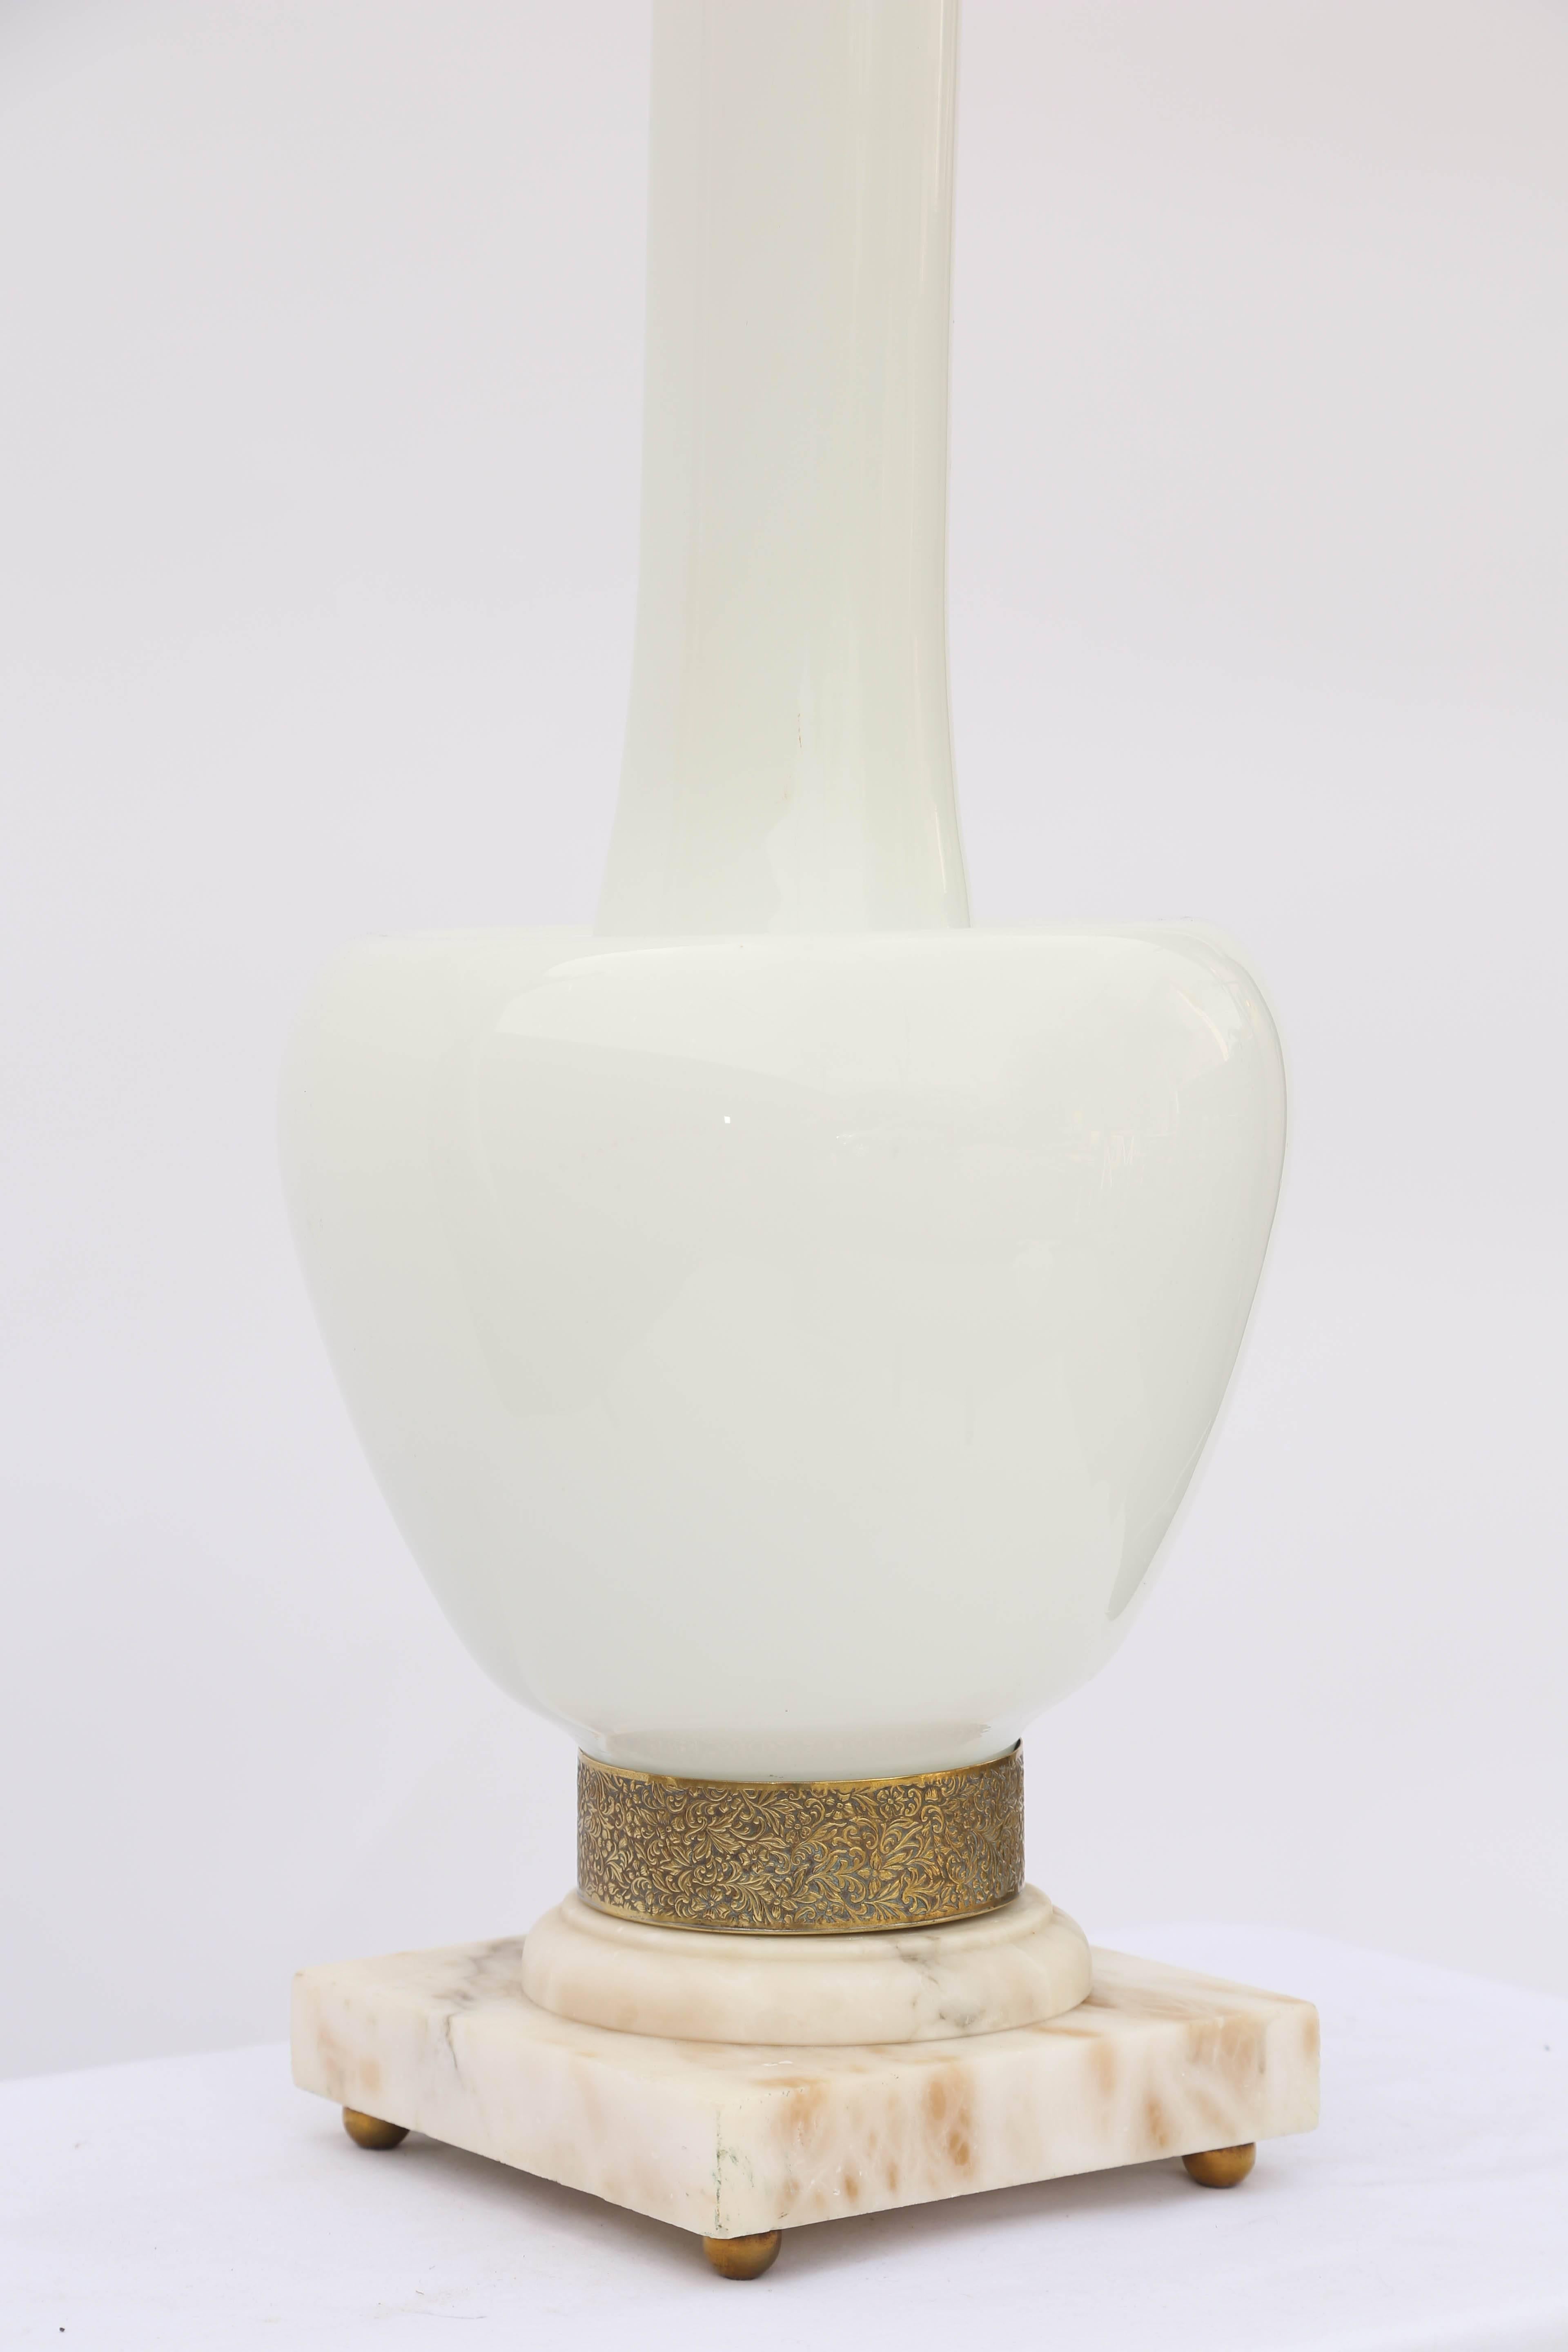 Oversized Handblown Italian Frosted Glass Lamp In Excellent Condition For Sale In West Palm Beach, FL